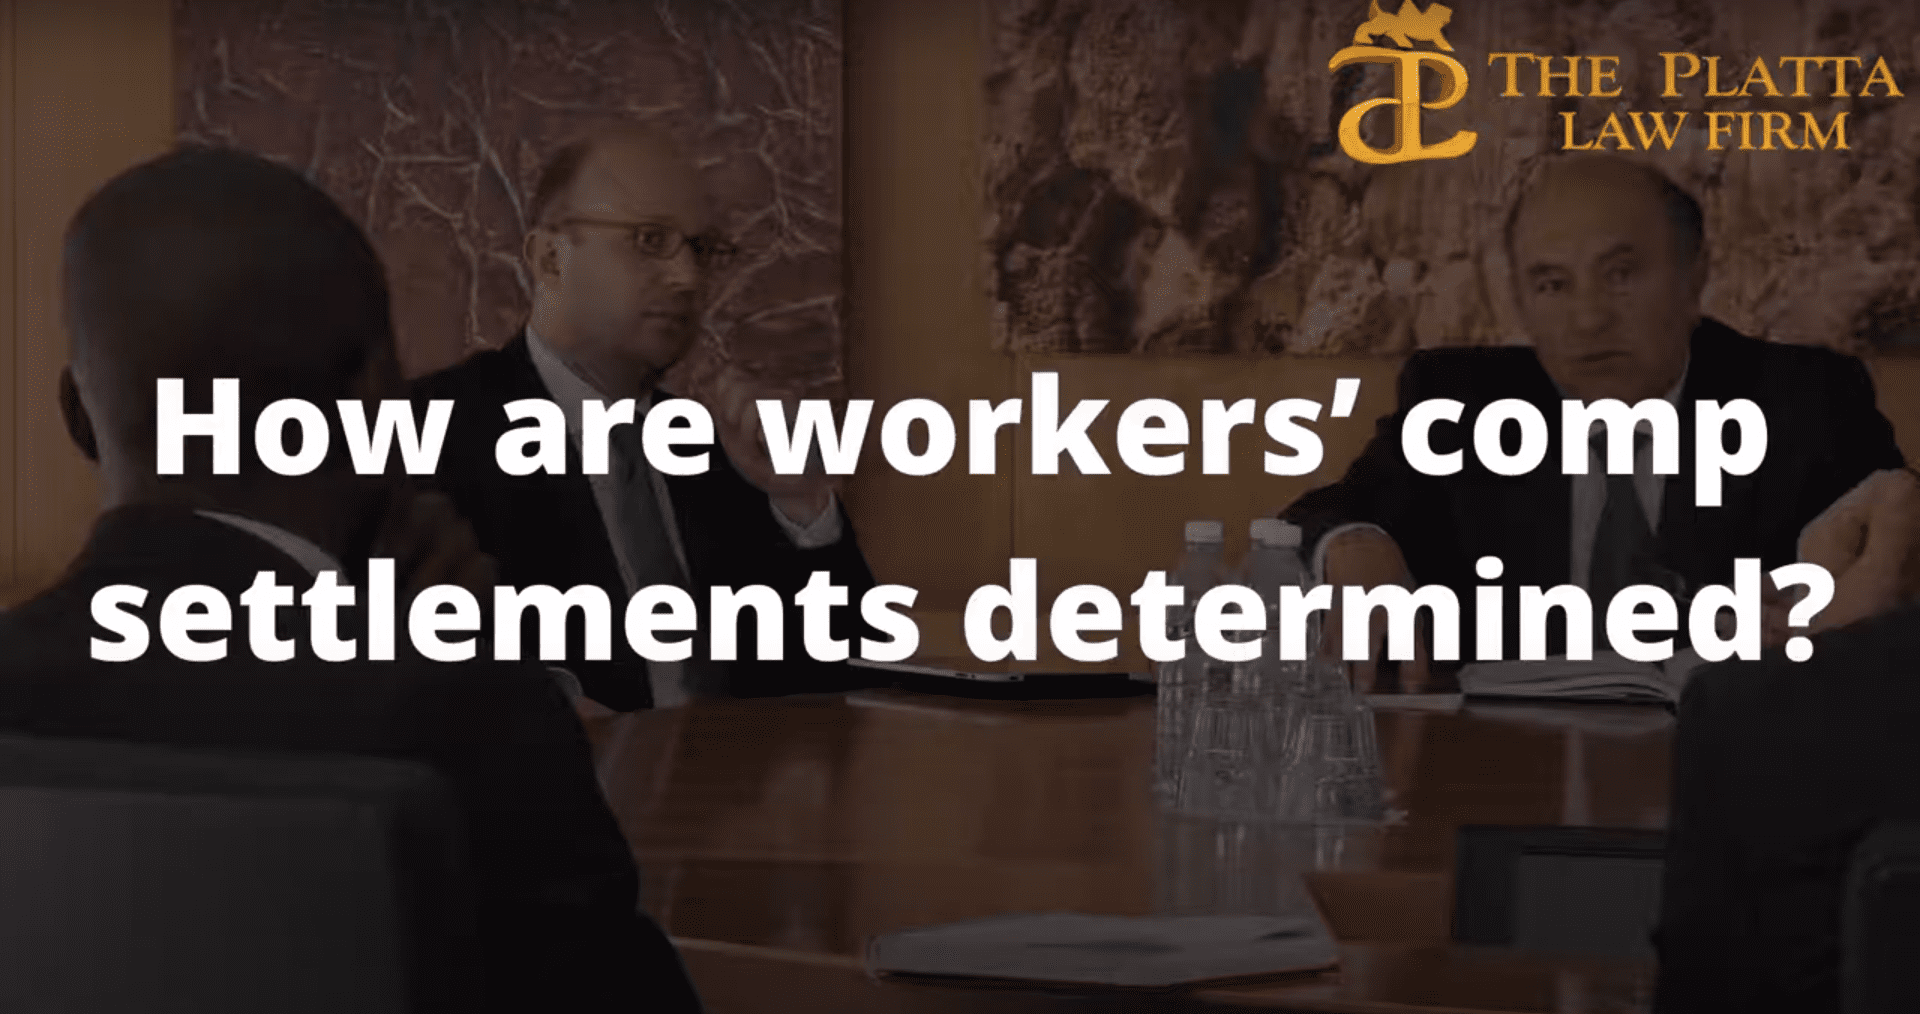 HOW DO THEY DETERMINE WORKERS COMPENSATION SETTLEMENT AMOUNTS Post